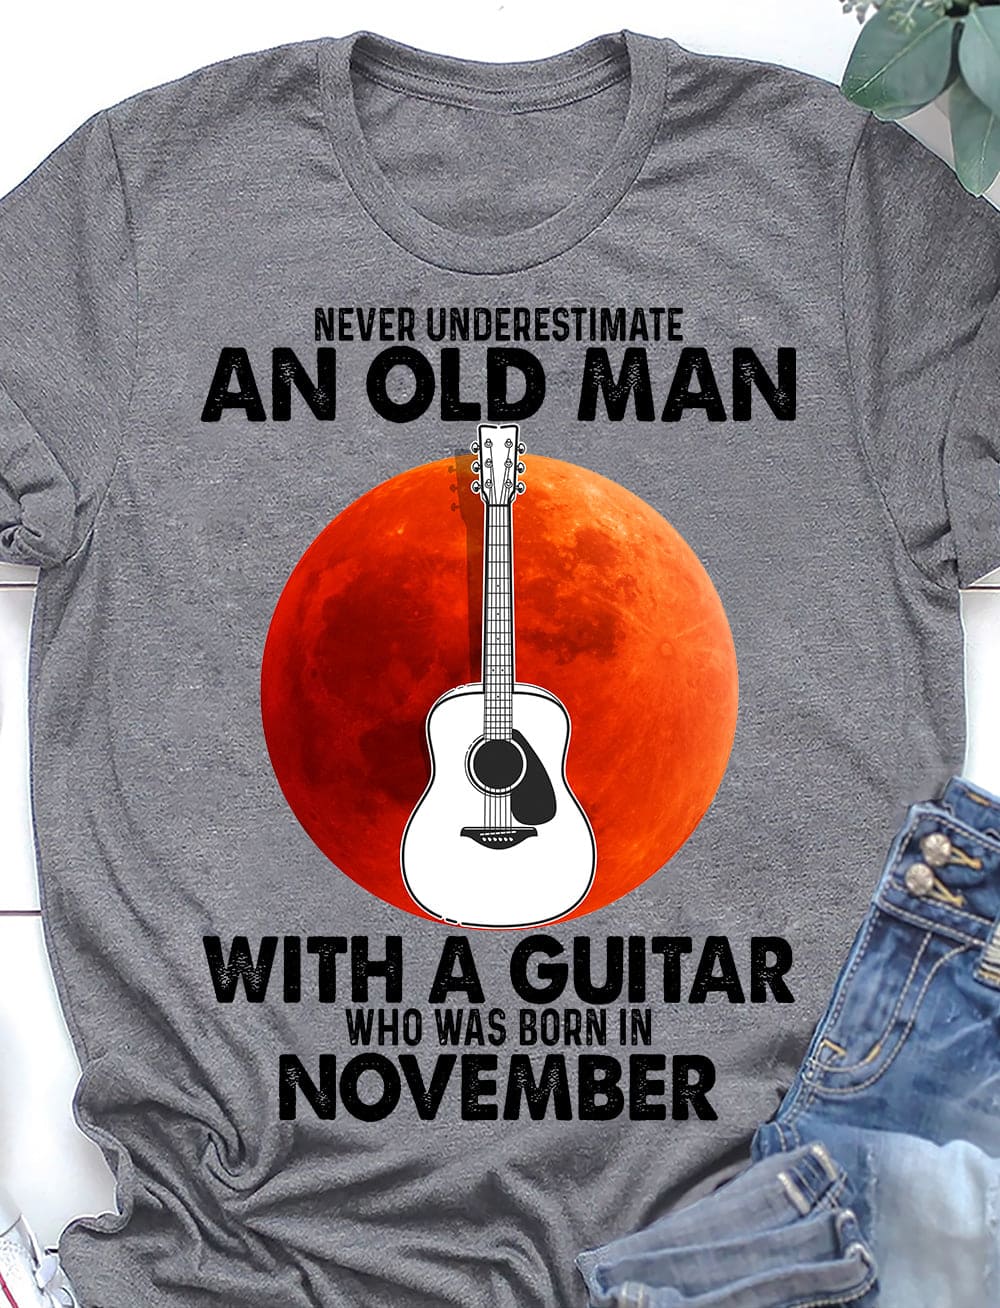 Never underestimate an old man with a guitar who was born in November - Gift for old guitarist